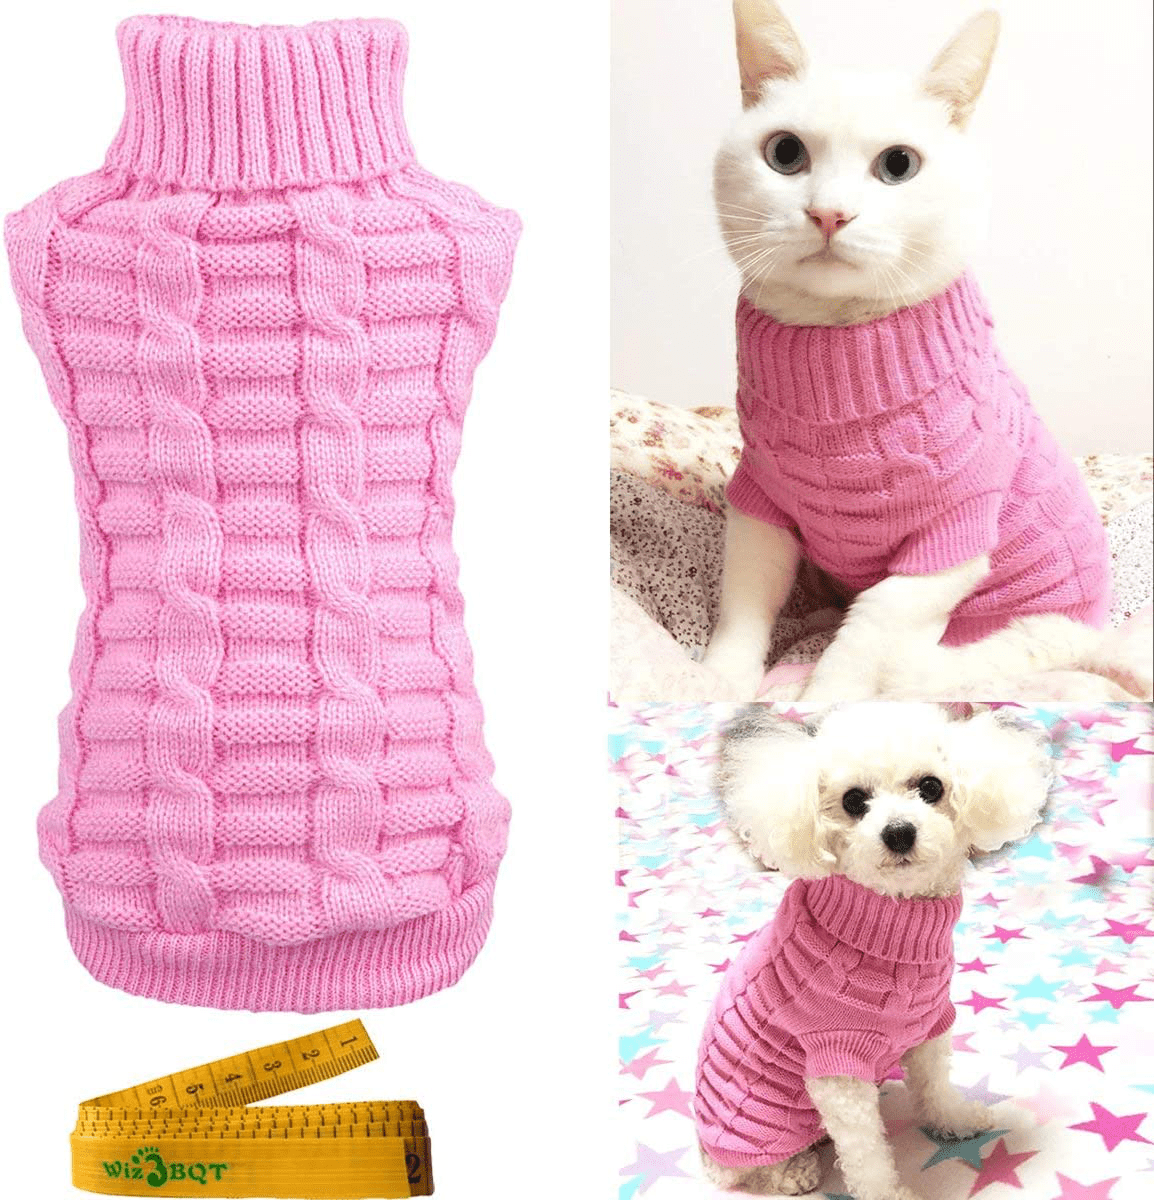 Wiz BBQT Knitted Braid Plait Turtleneck Sweater Knitwear Outerwear for Dogs & Cats